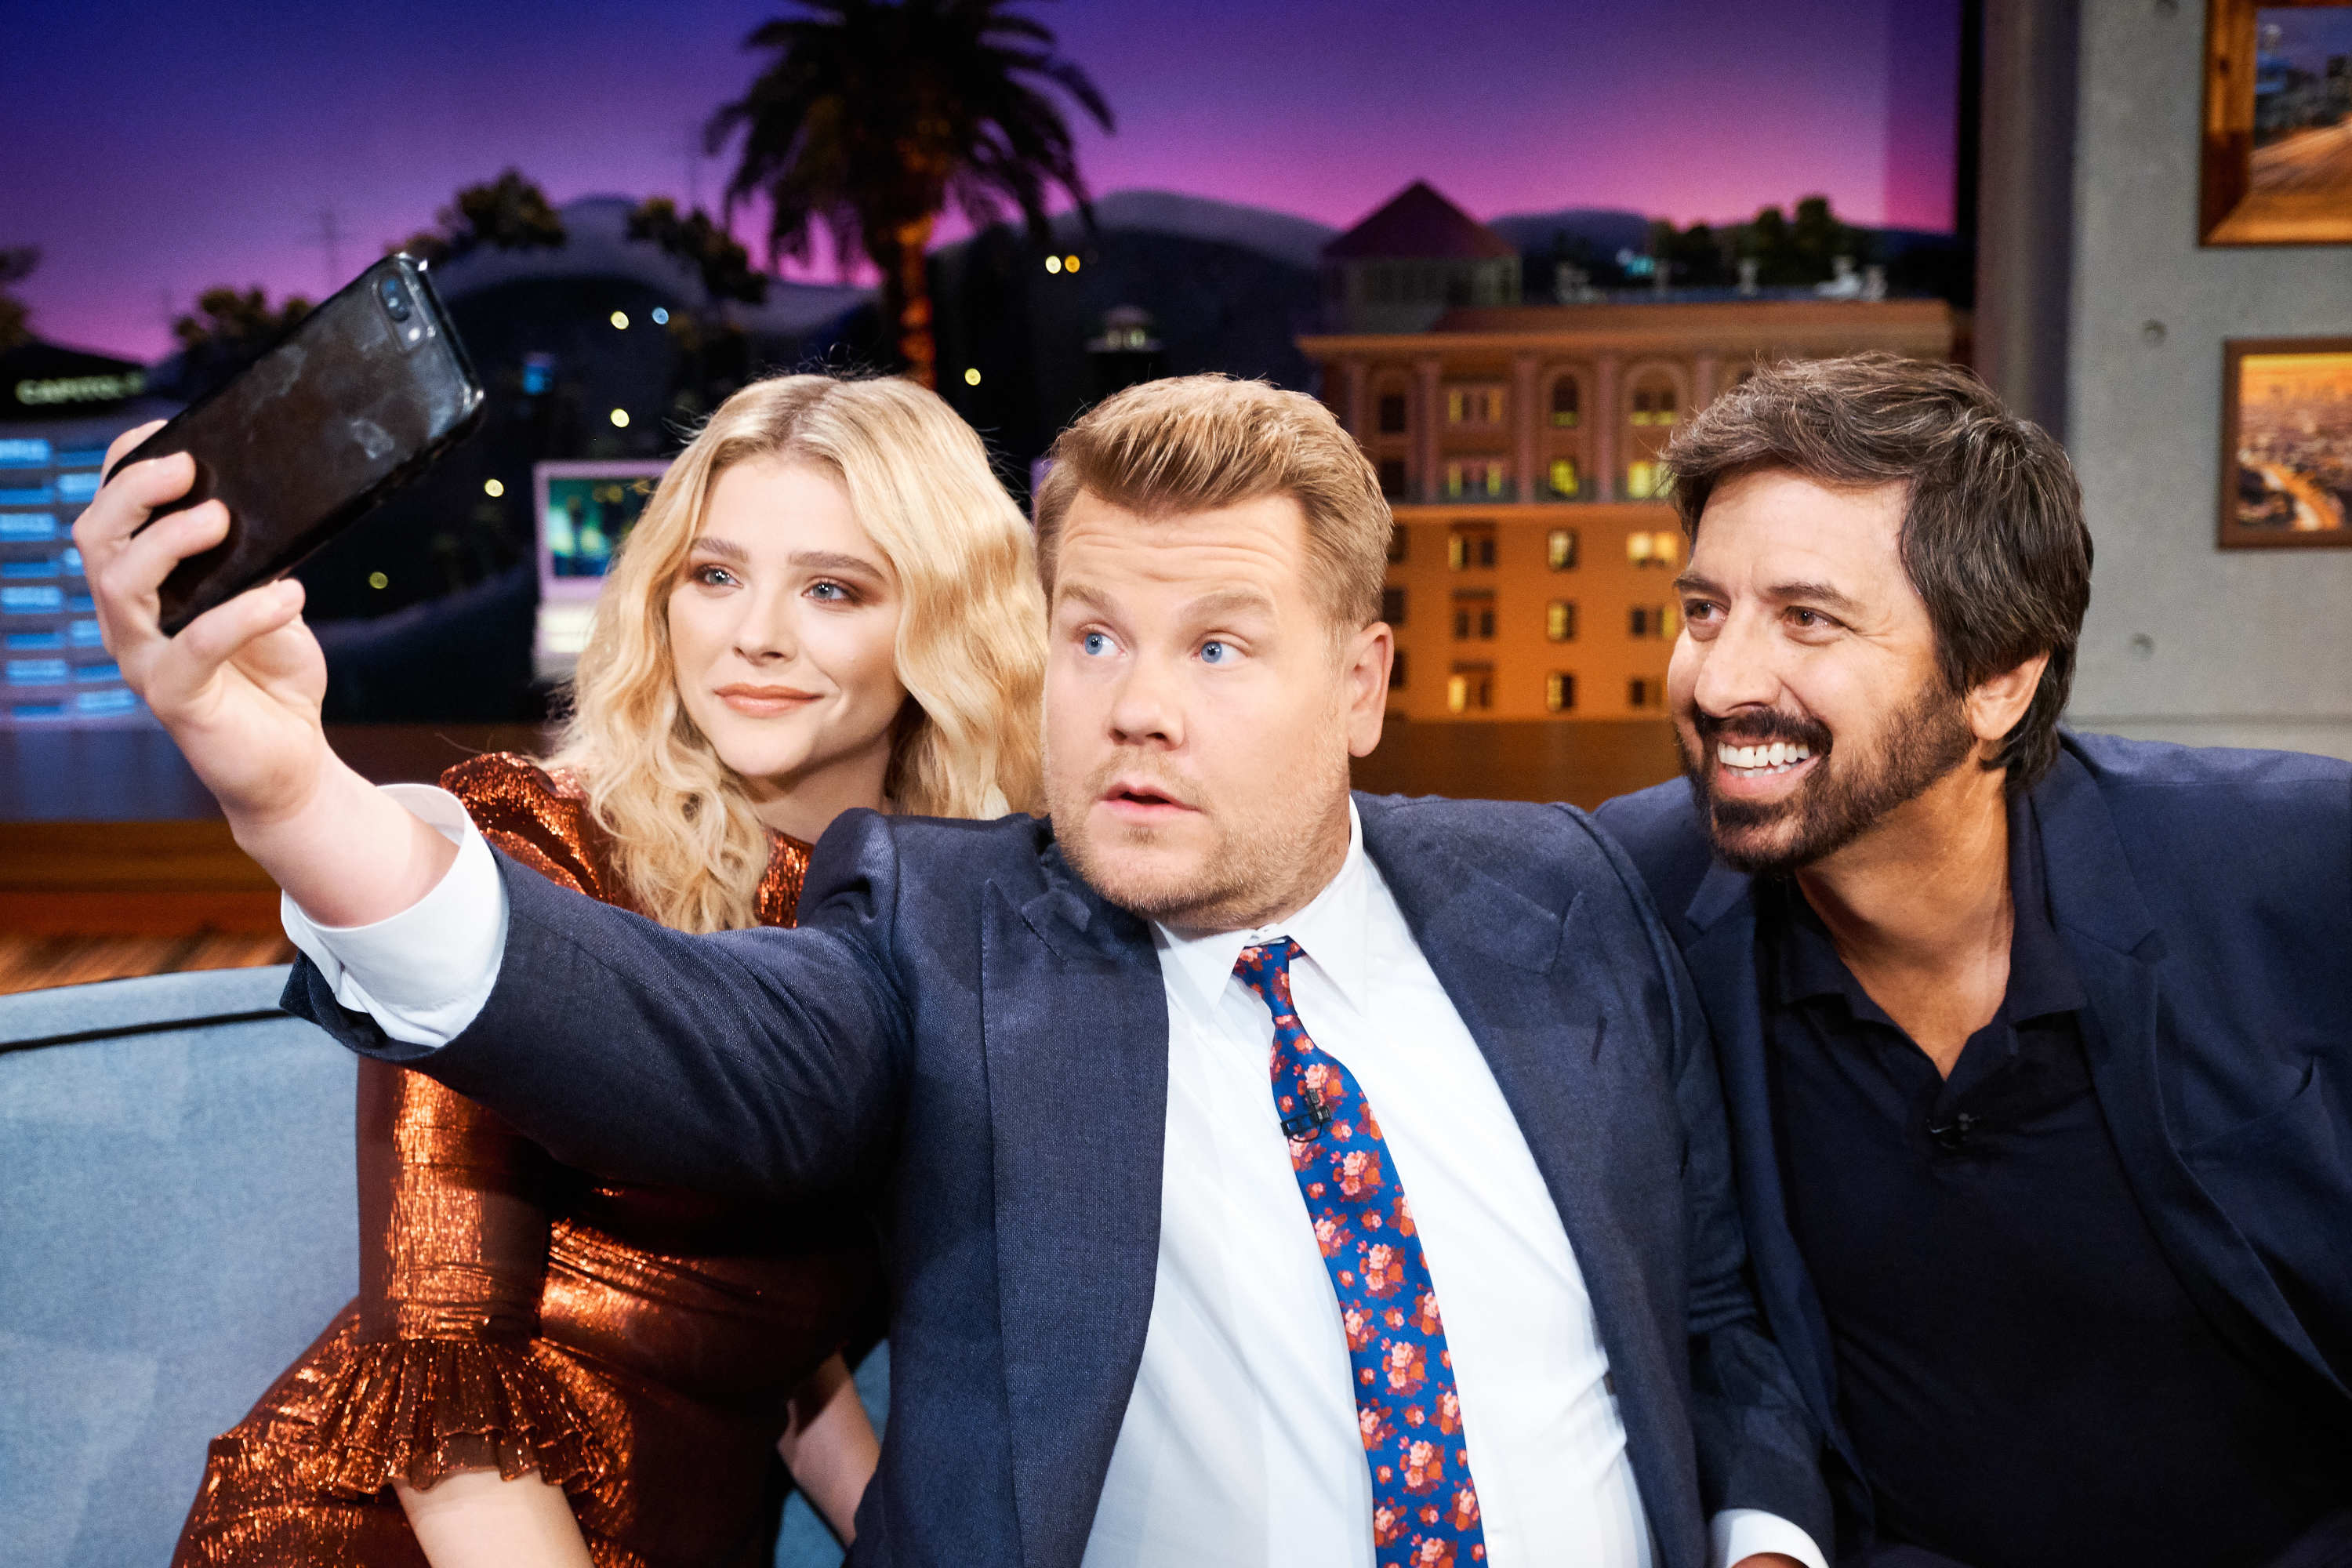 chloe-grace-moretz-the-late-late-show-with-james-corden-august-8th-2018-4.jpg